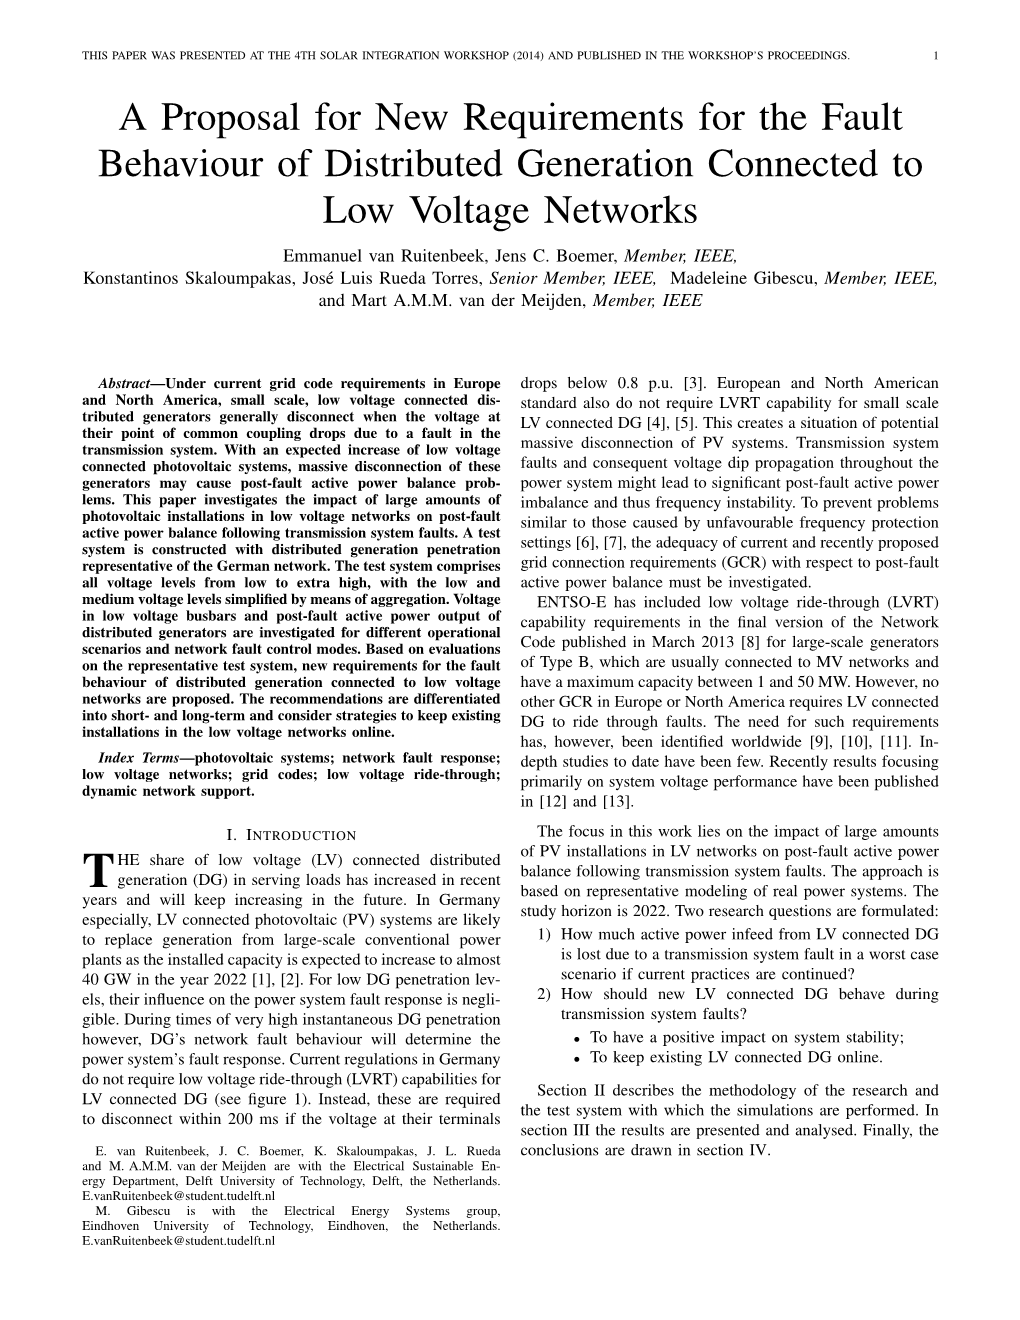 A Proposal for New Requirements for the Fault Behaviour of Distributed Generation Connected to Low Voltage Networks Emmanuel Van Ruitenbeek, Jens C